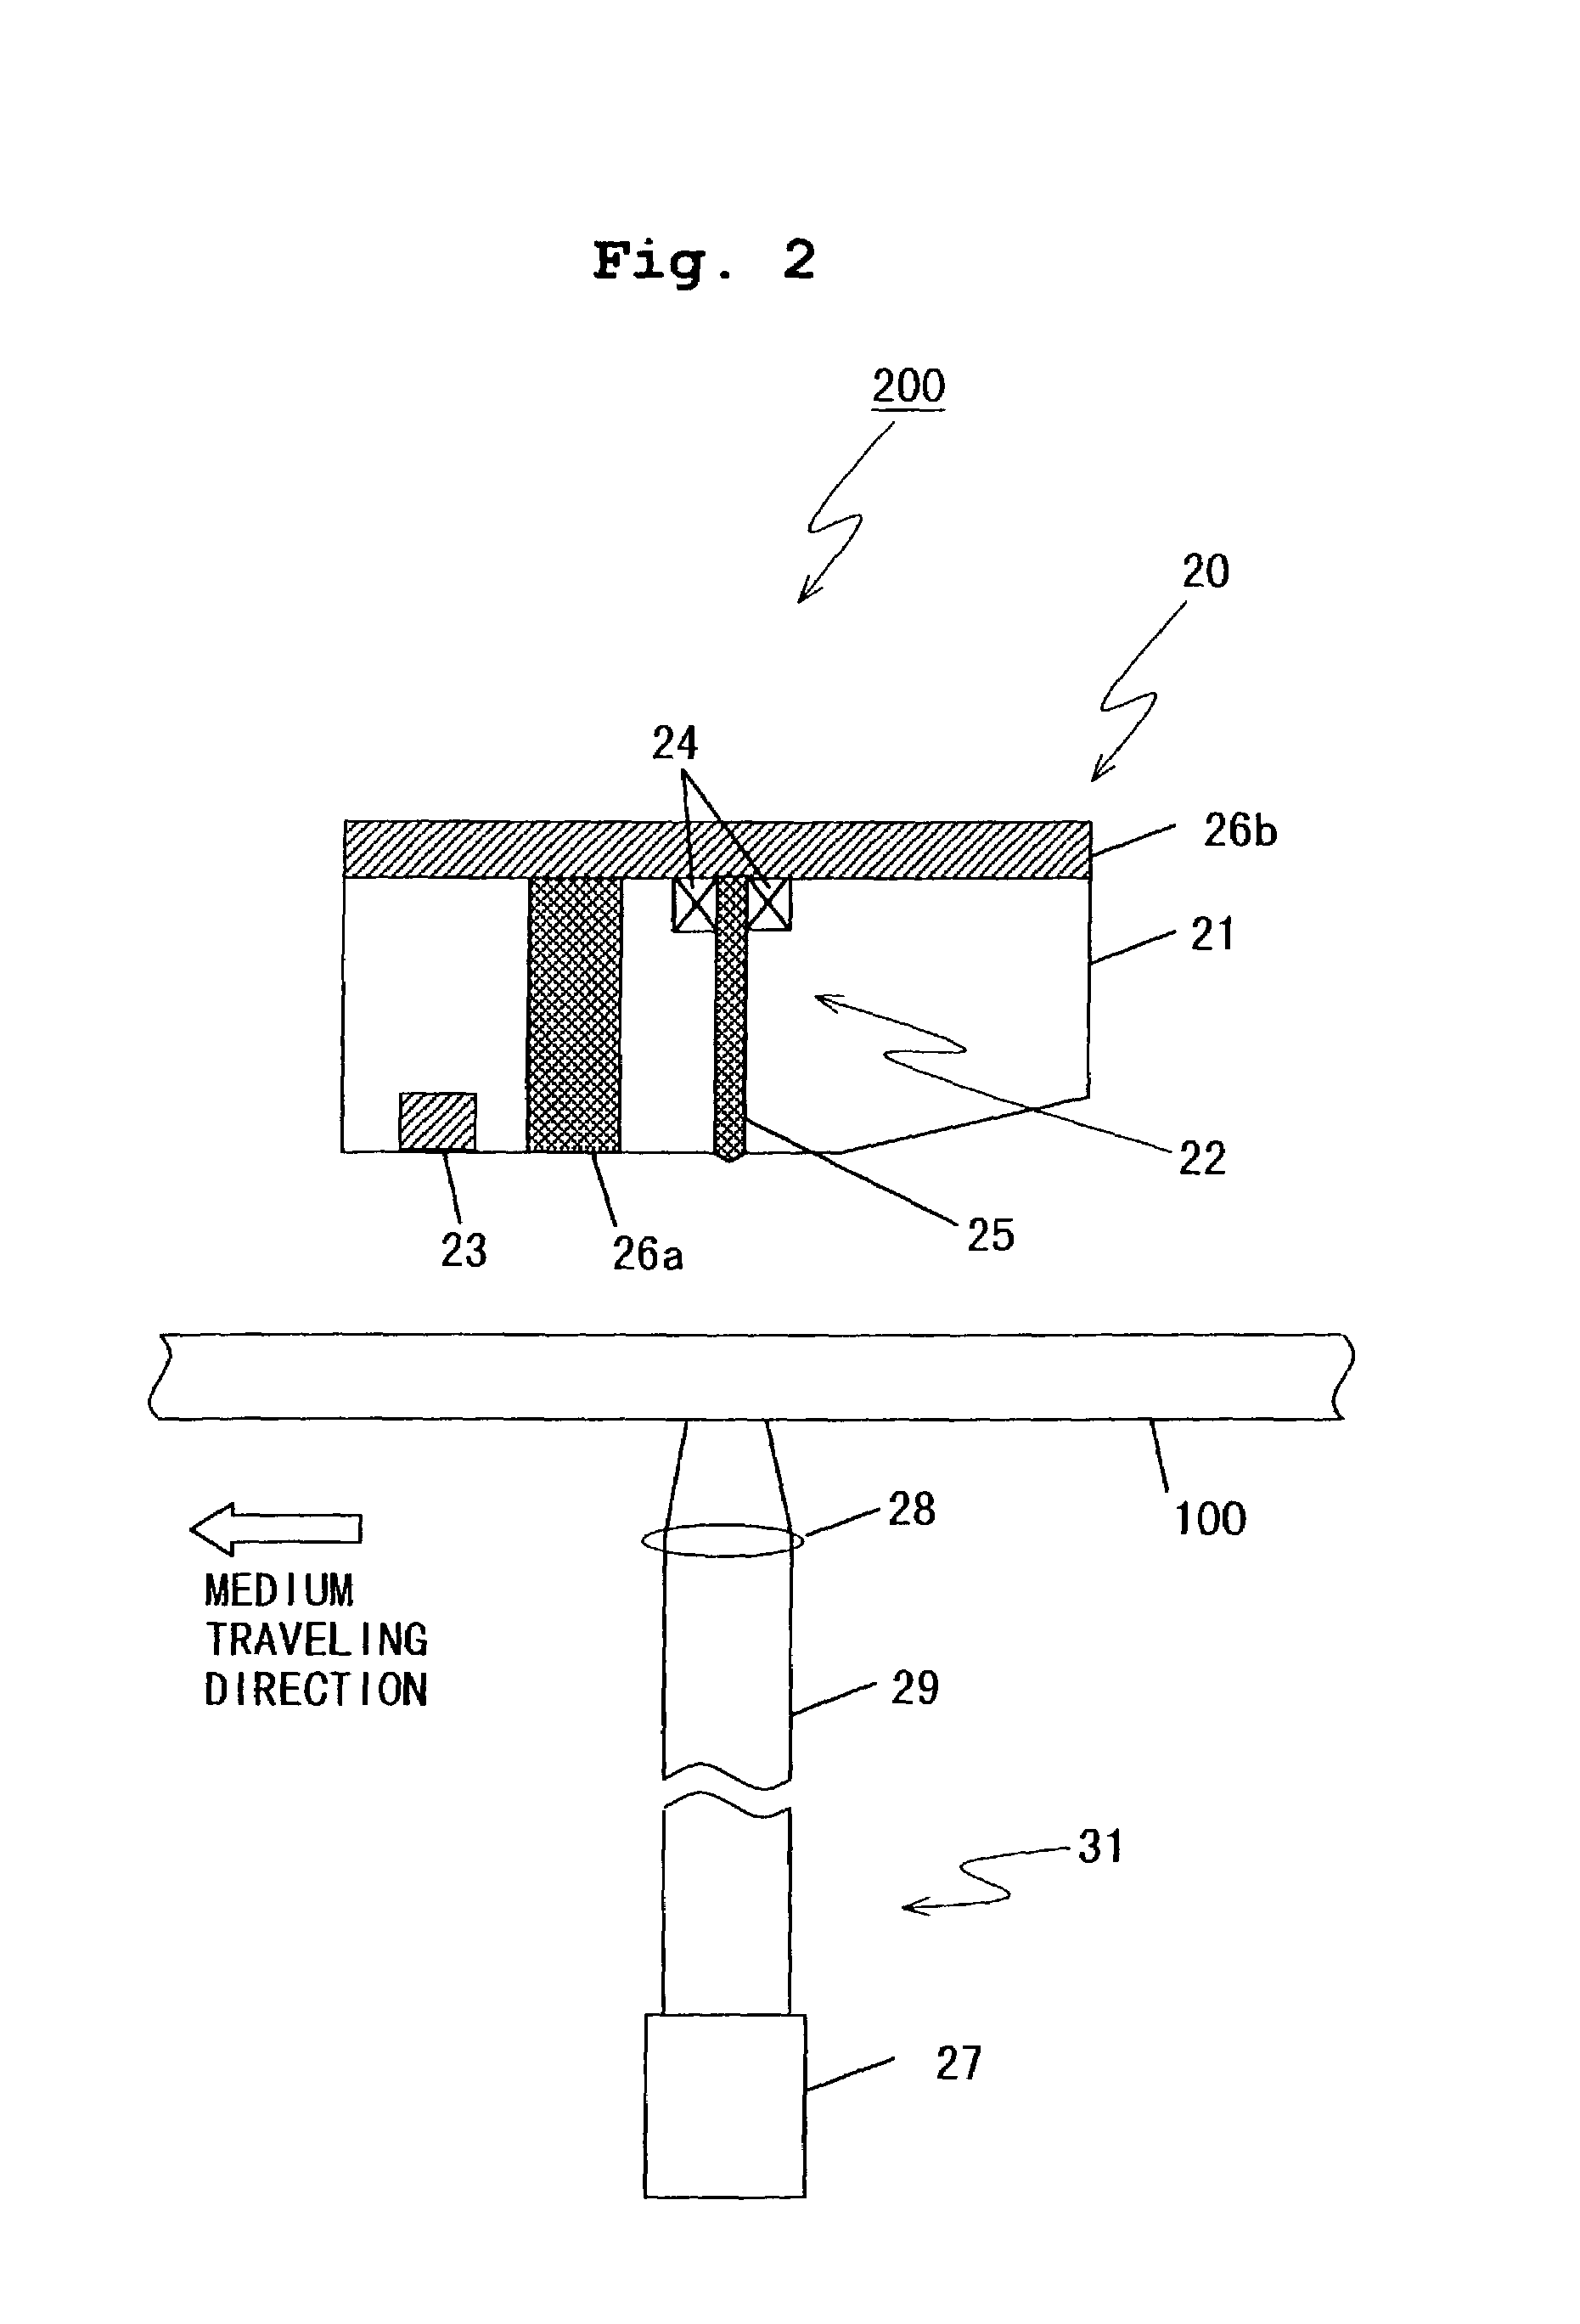 Magneto-optical recording and reproducing method, using reproducing layer with high saturation magnetization